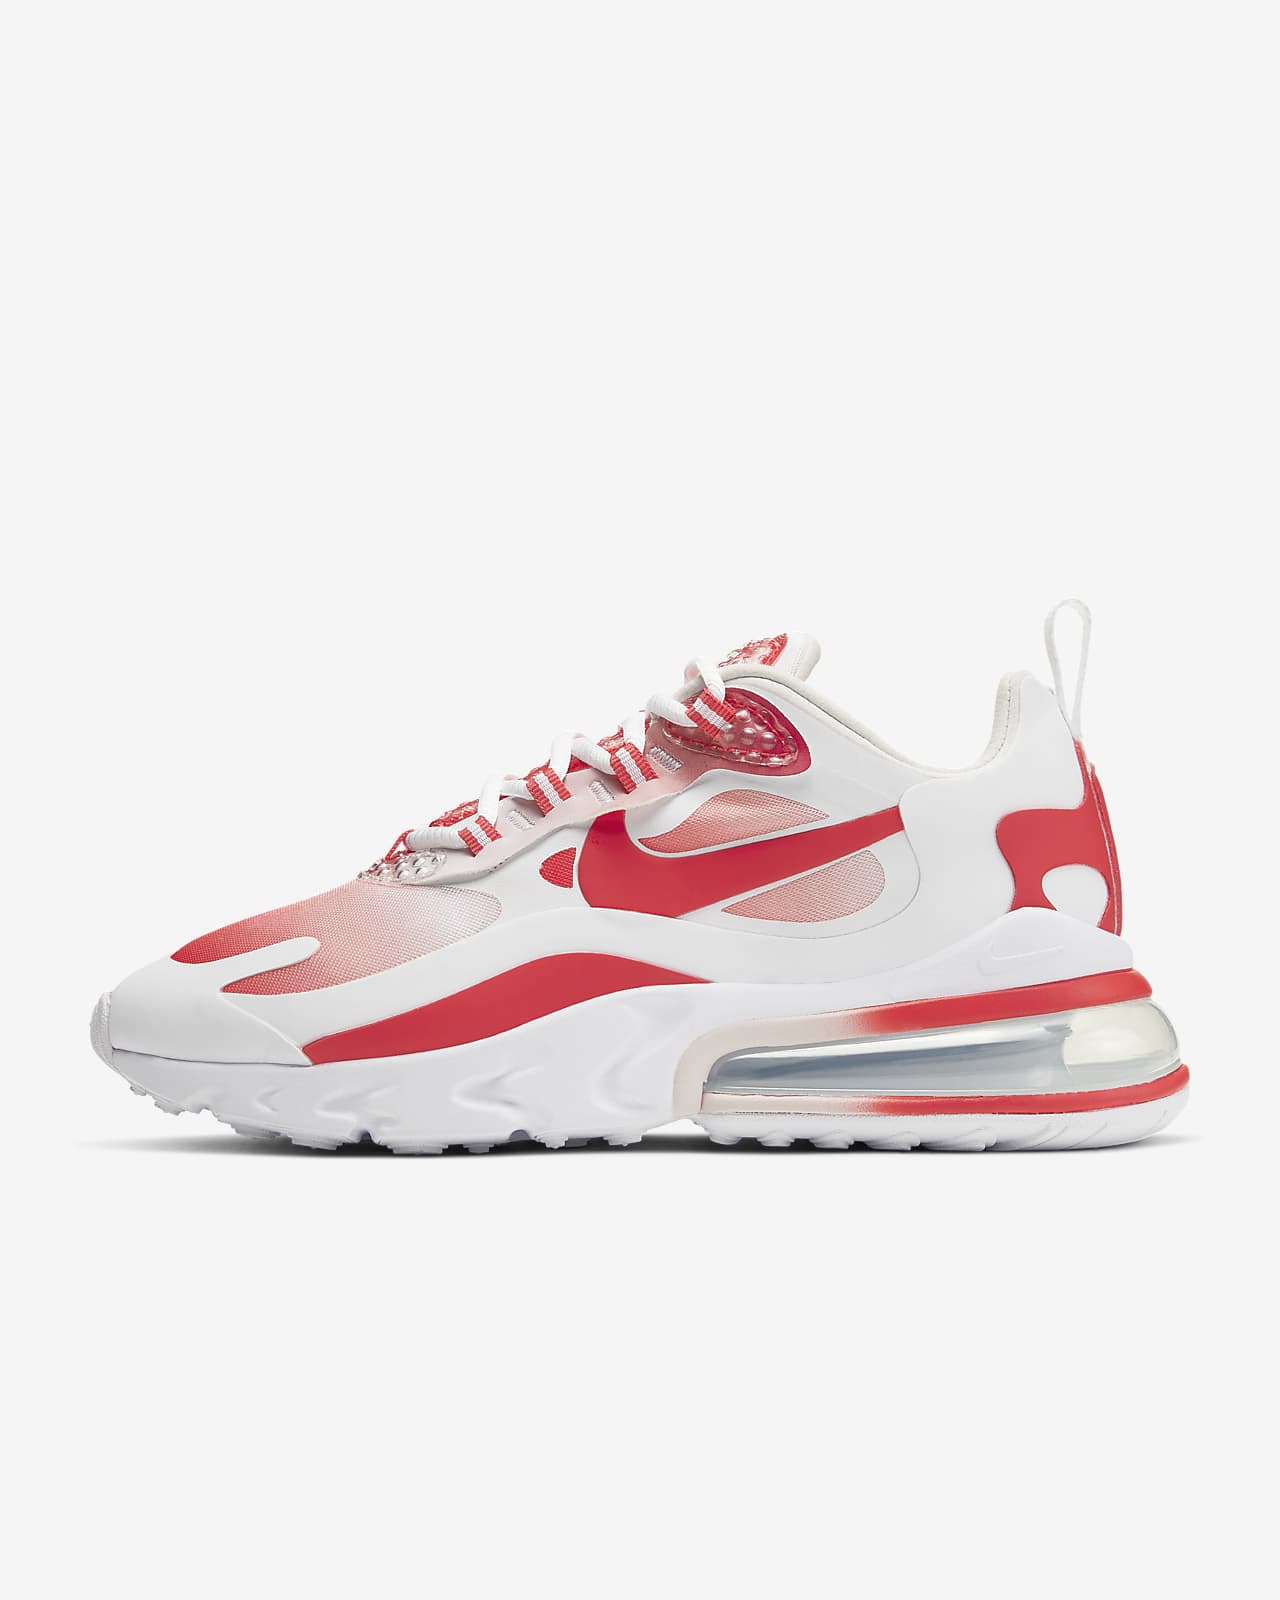 air max 270 women's red